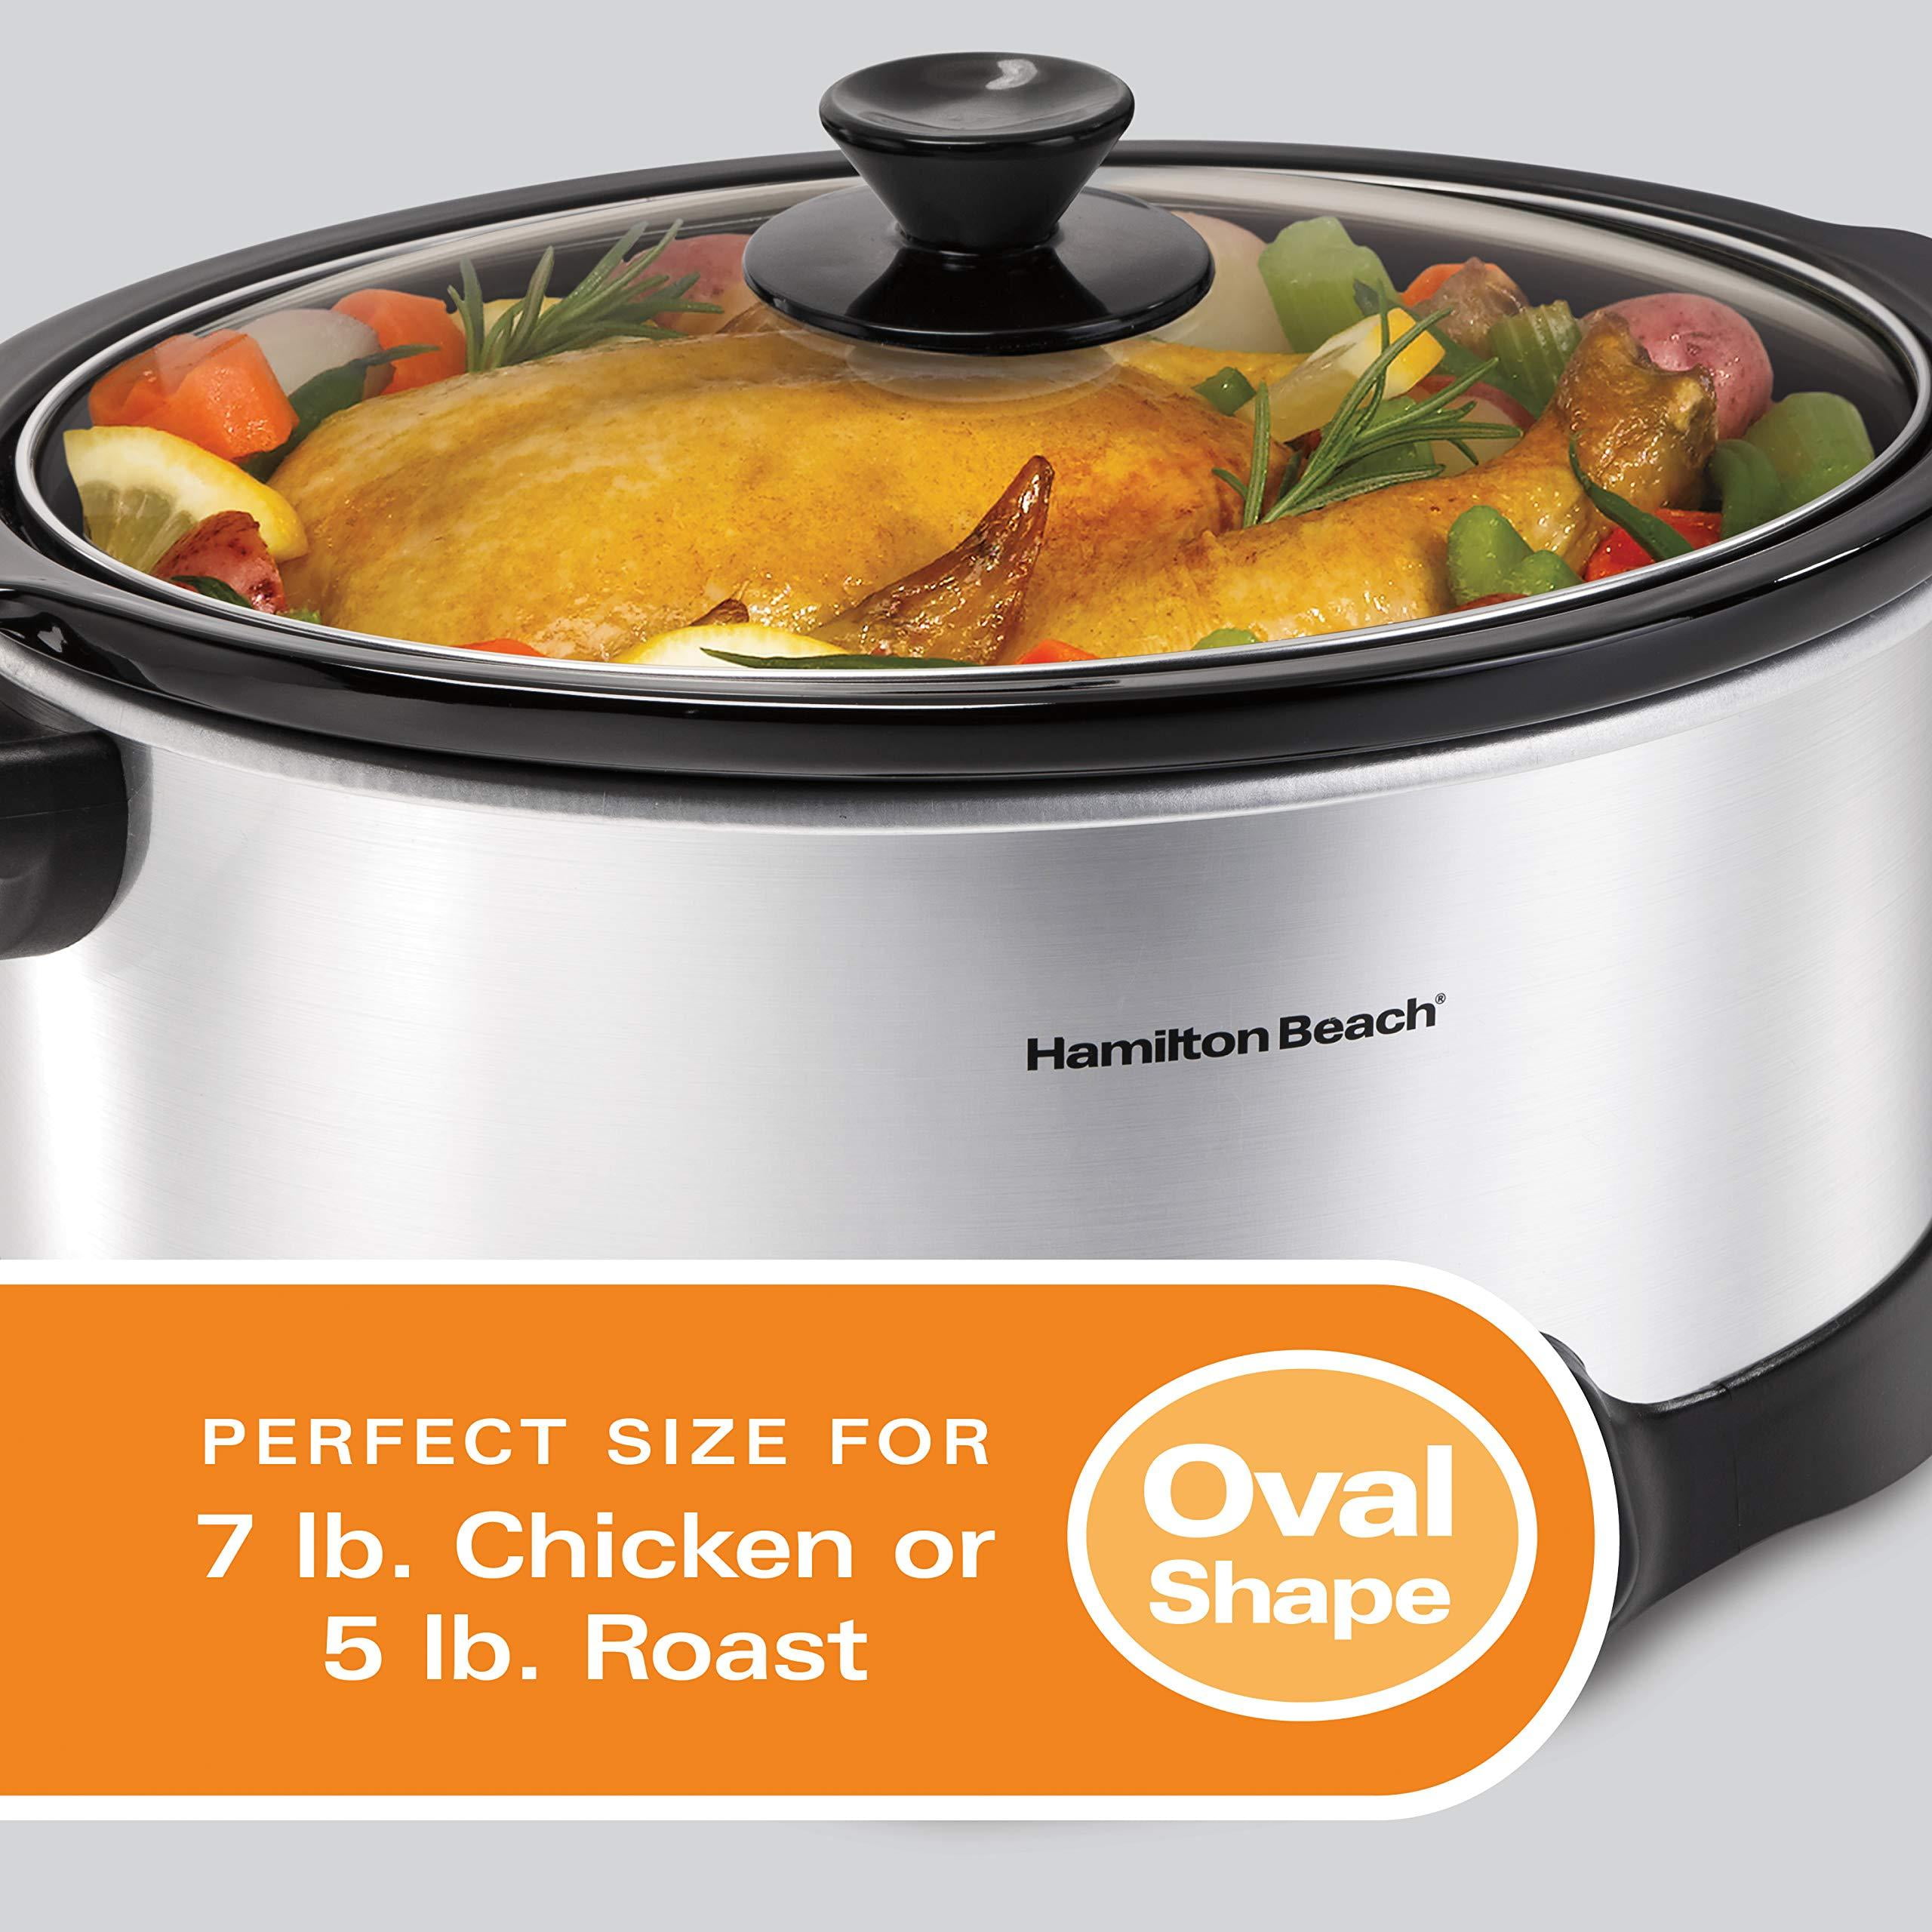 Hamilton Beach 8 Quart Programmable Slow Cooker with Three Temperature  Settings, Dishwasher Safe Crock and Lid, Silver (33480)